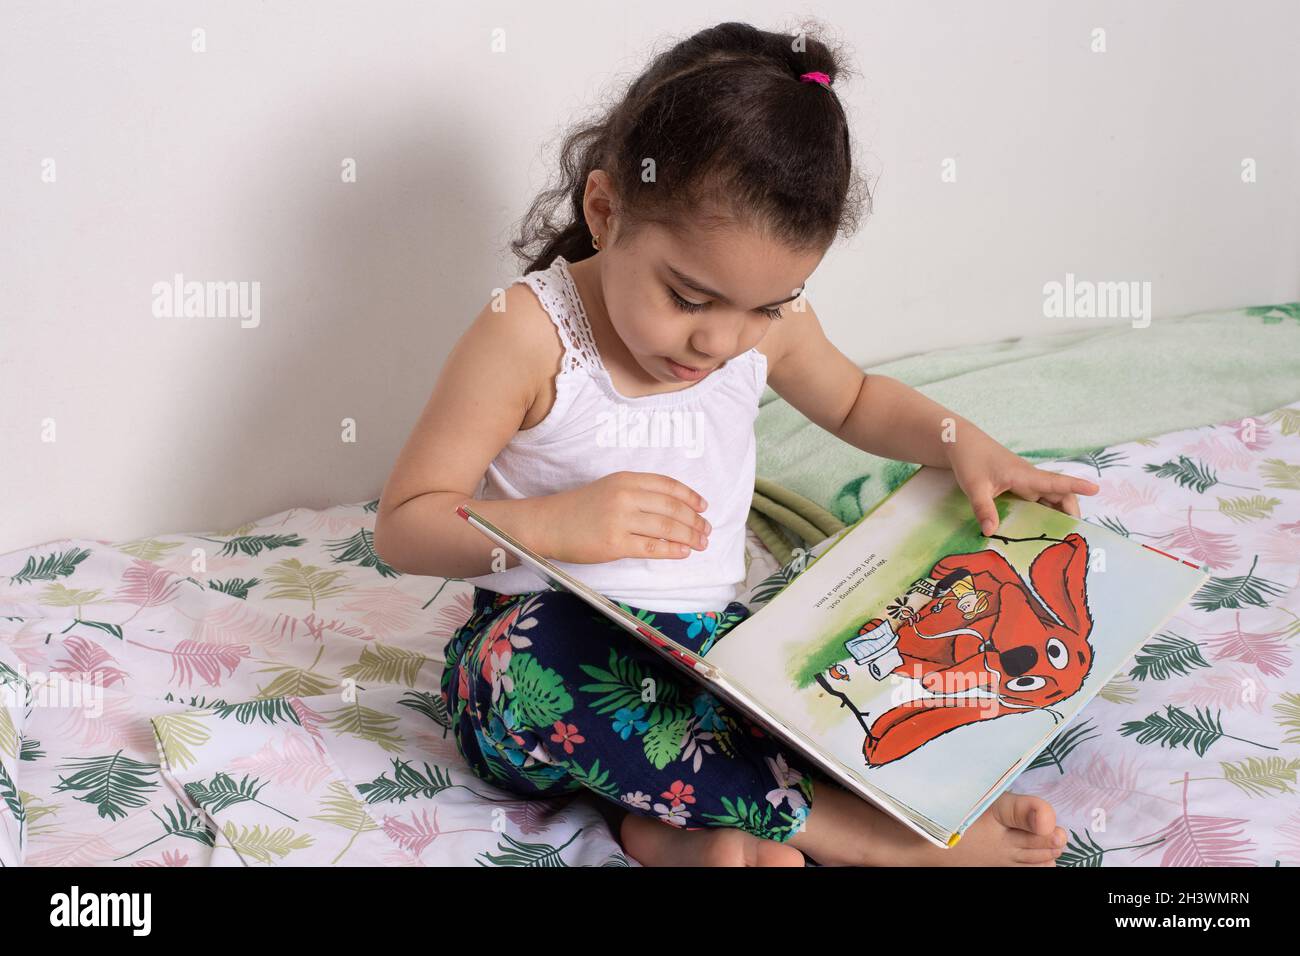 Preschool child at home, 4 year old girl sitting on bed looking at picture book Stock Photo